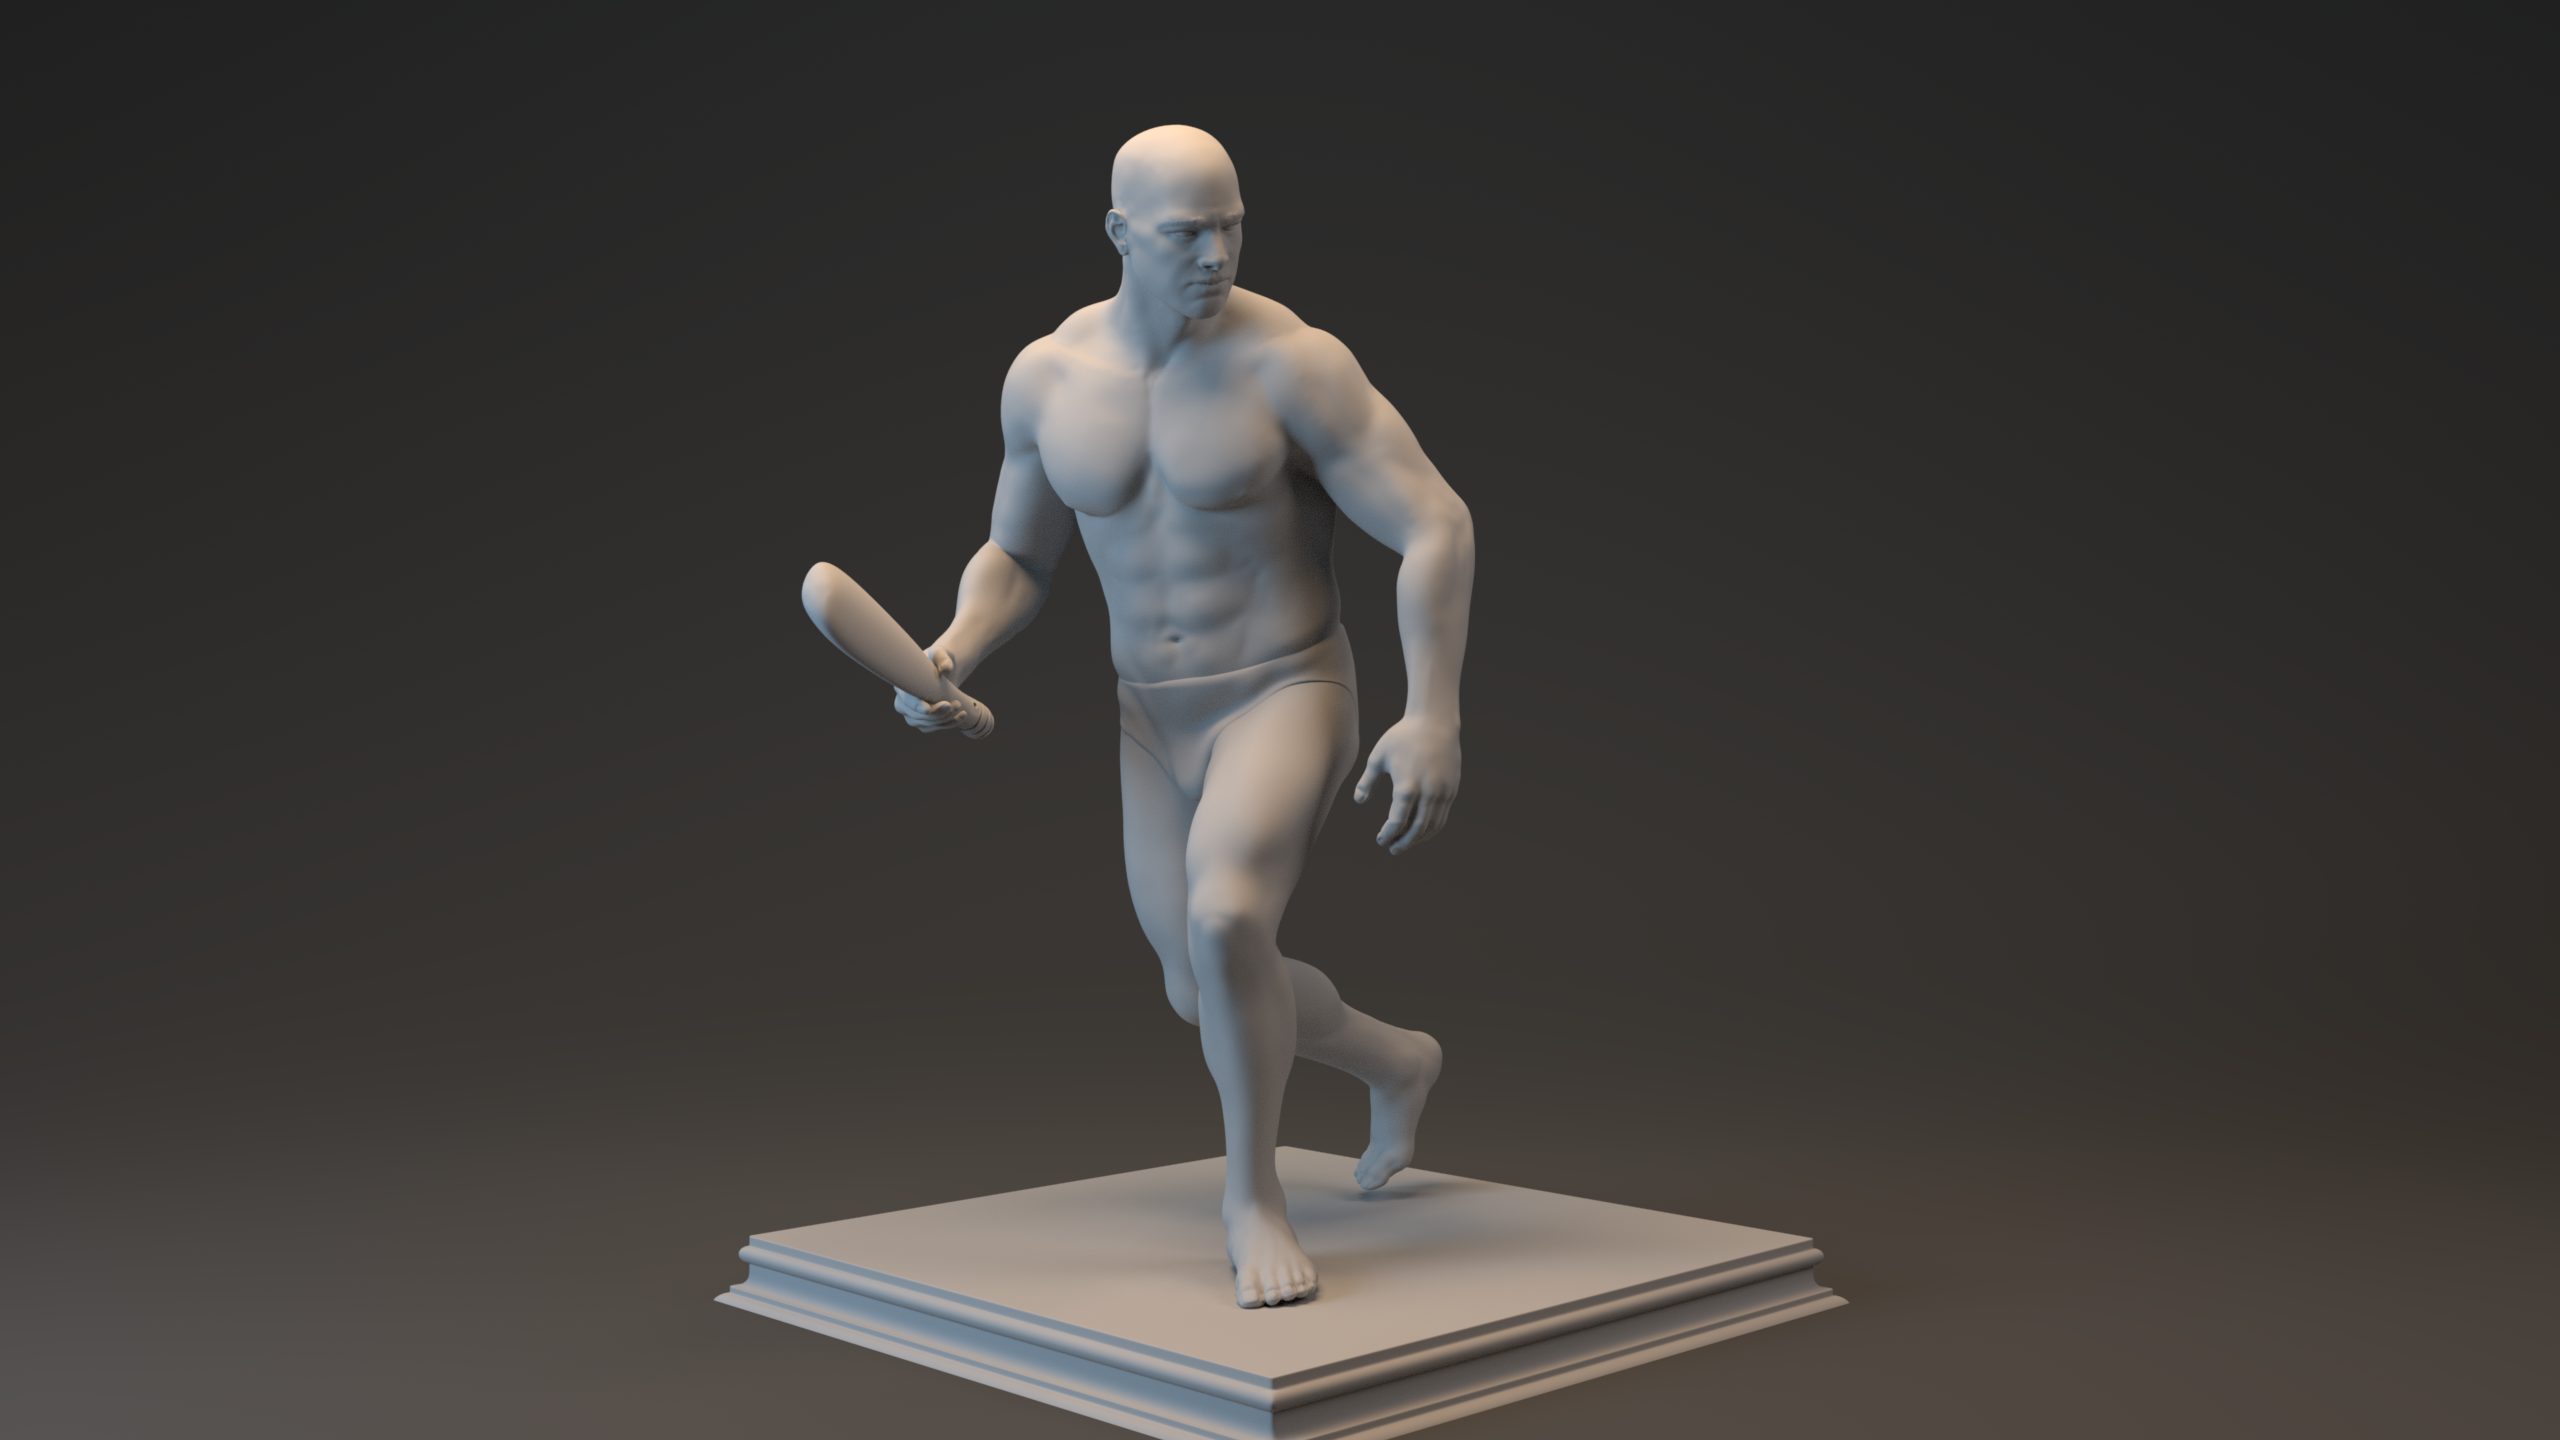 BA VFX work by Henry Cordingley showing a 3D model of a male sculpture